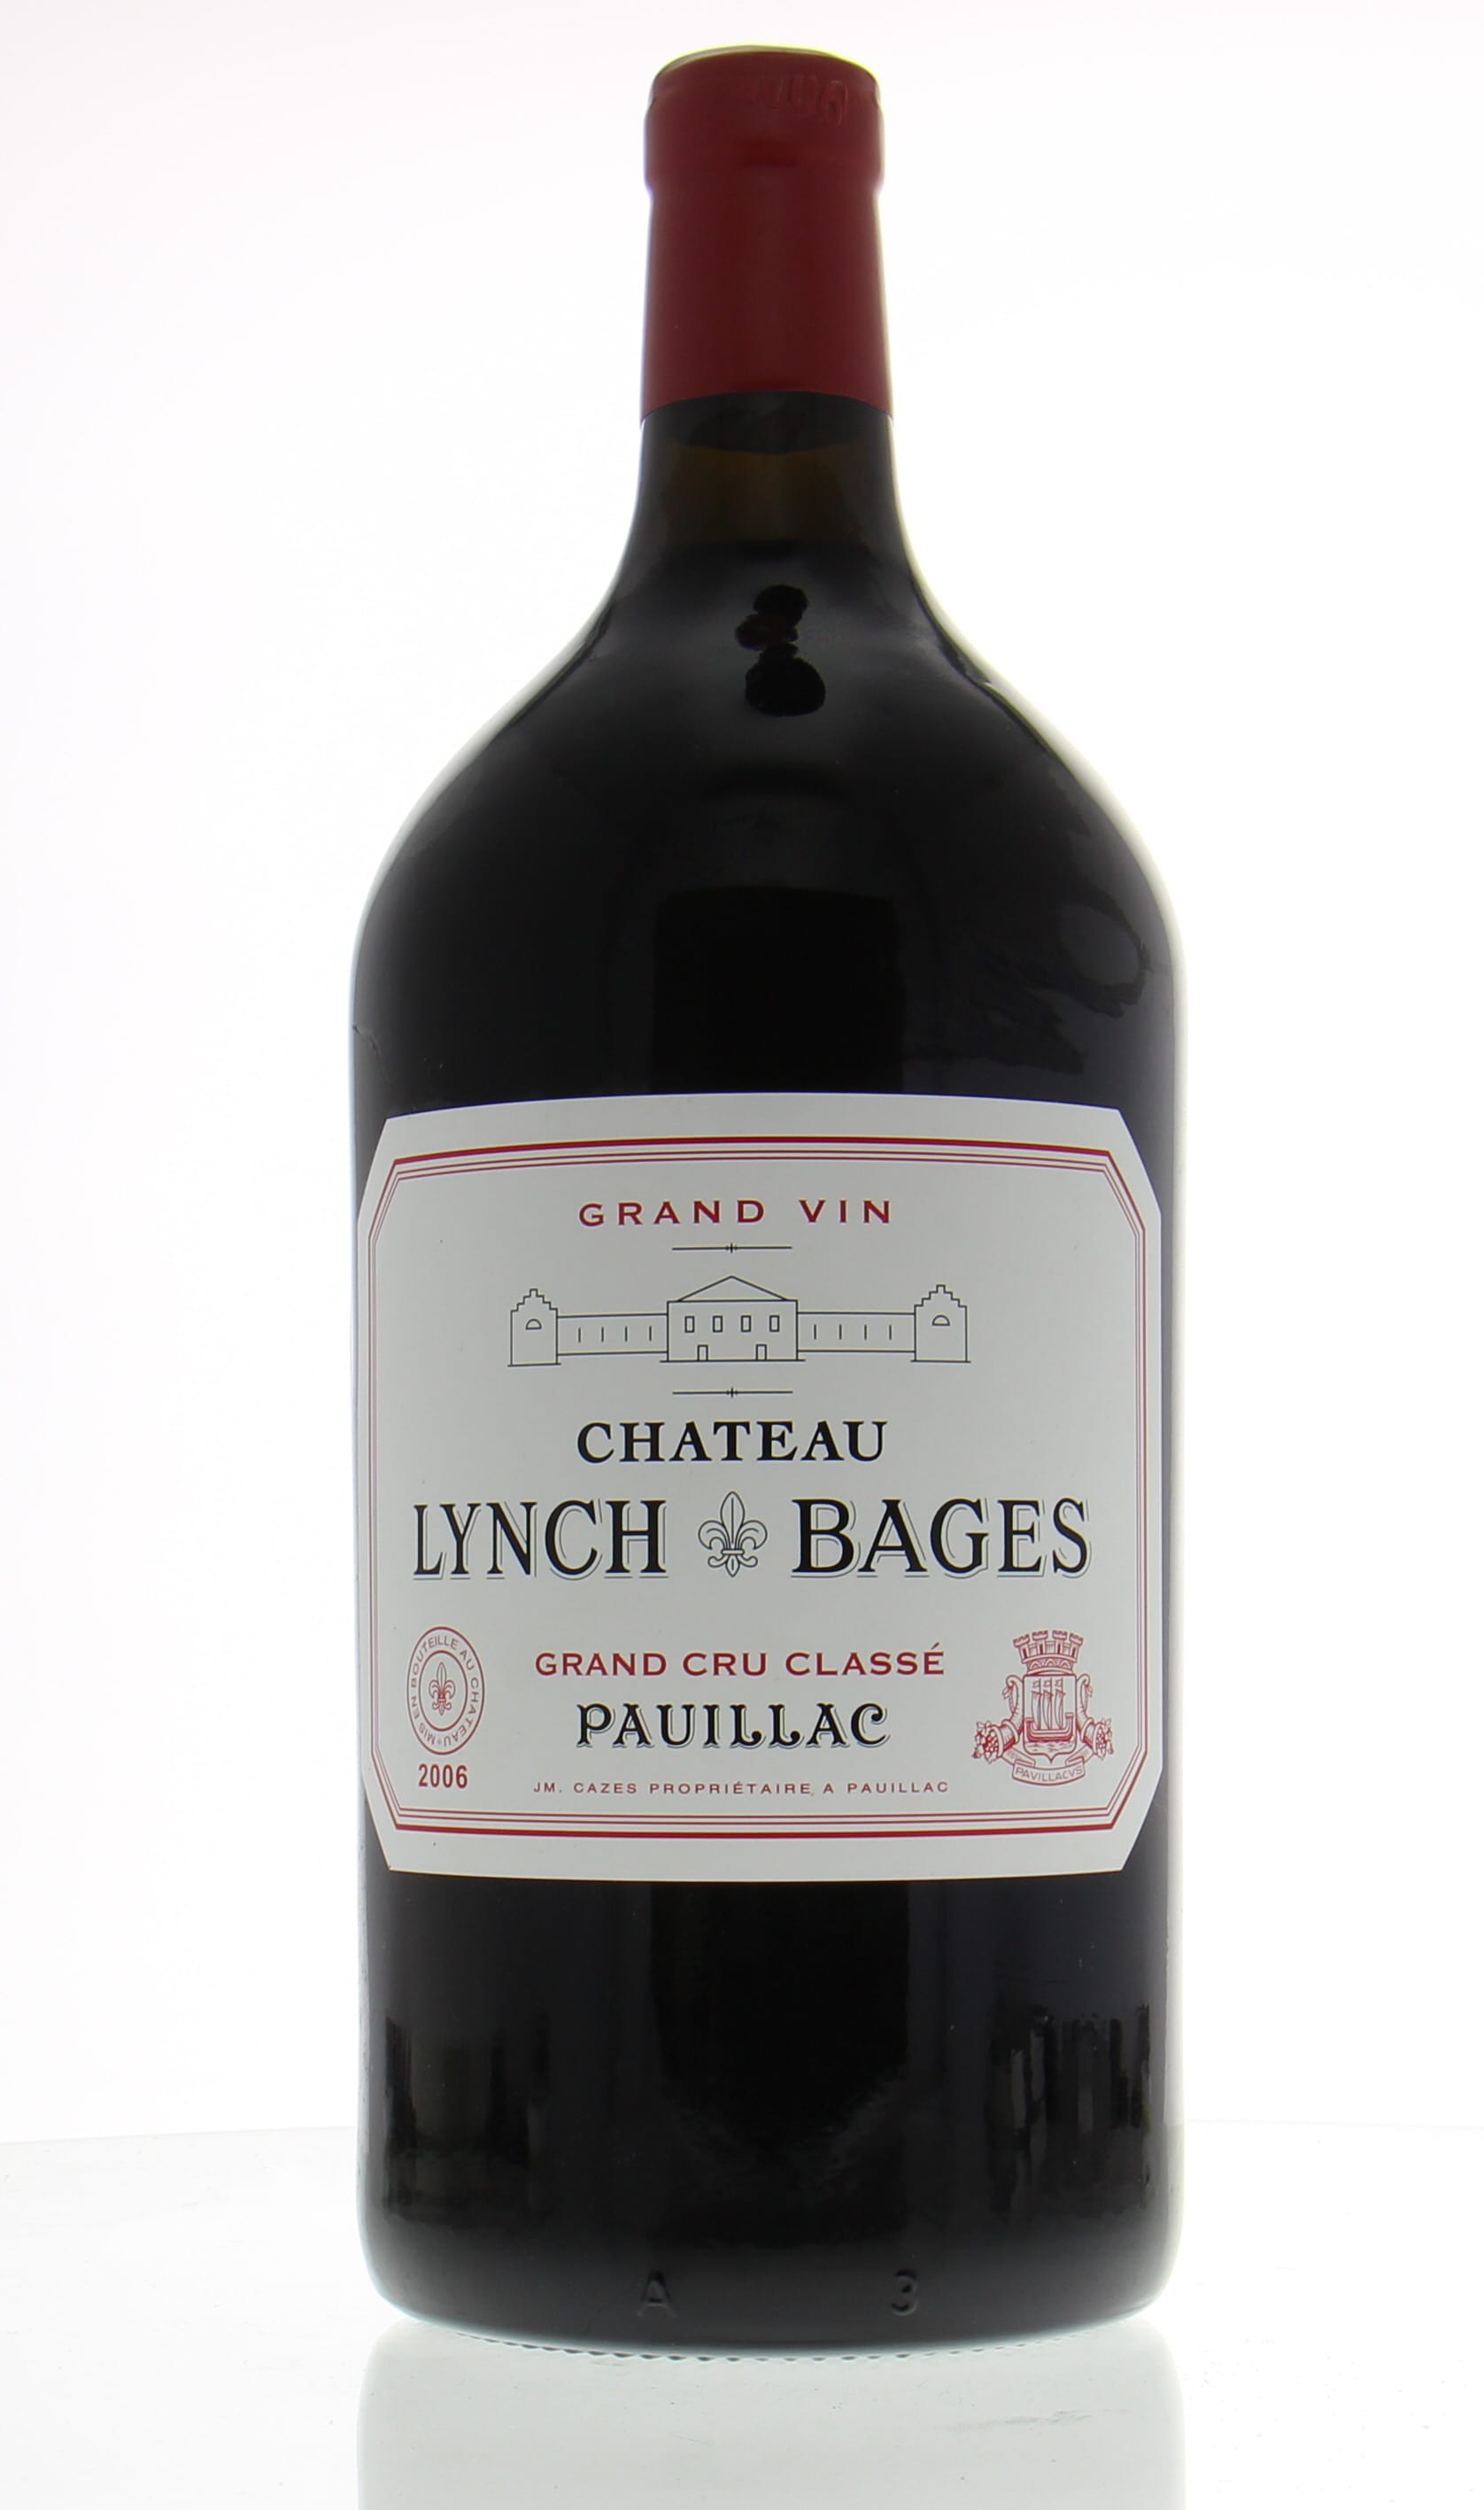 Chateau Lynch Bages - Chateau Lynch Bages 2006